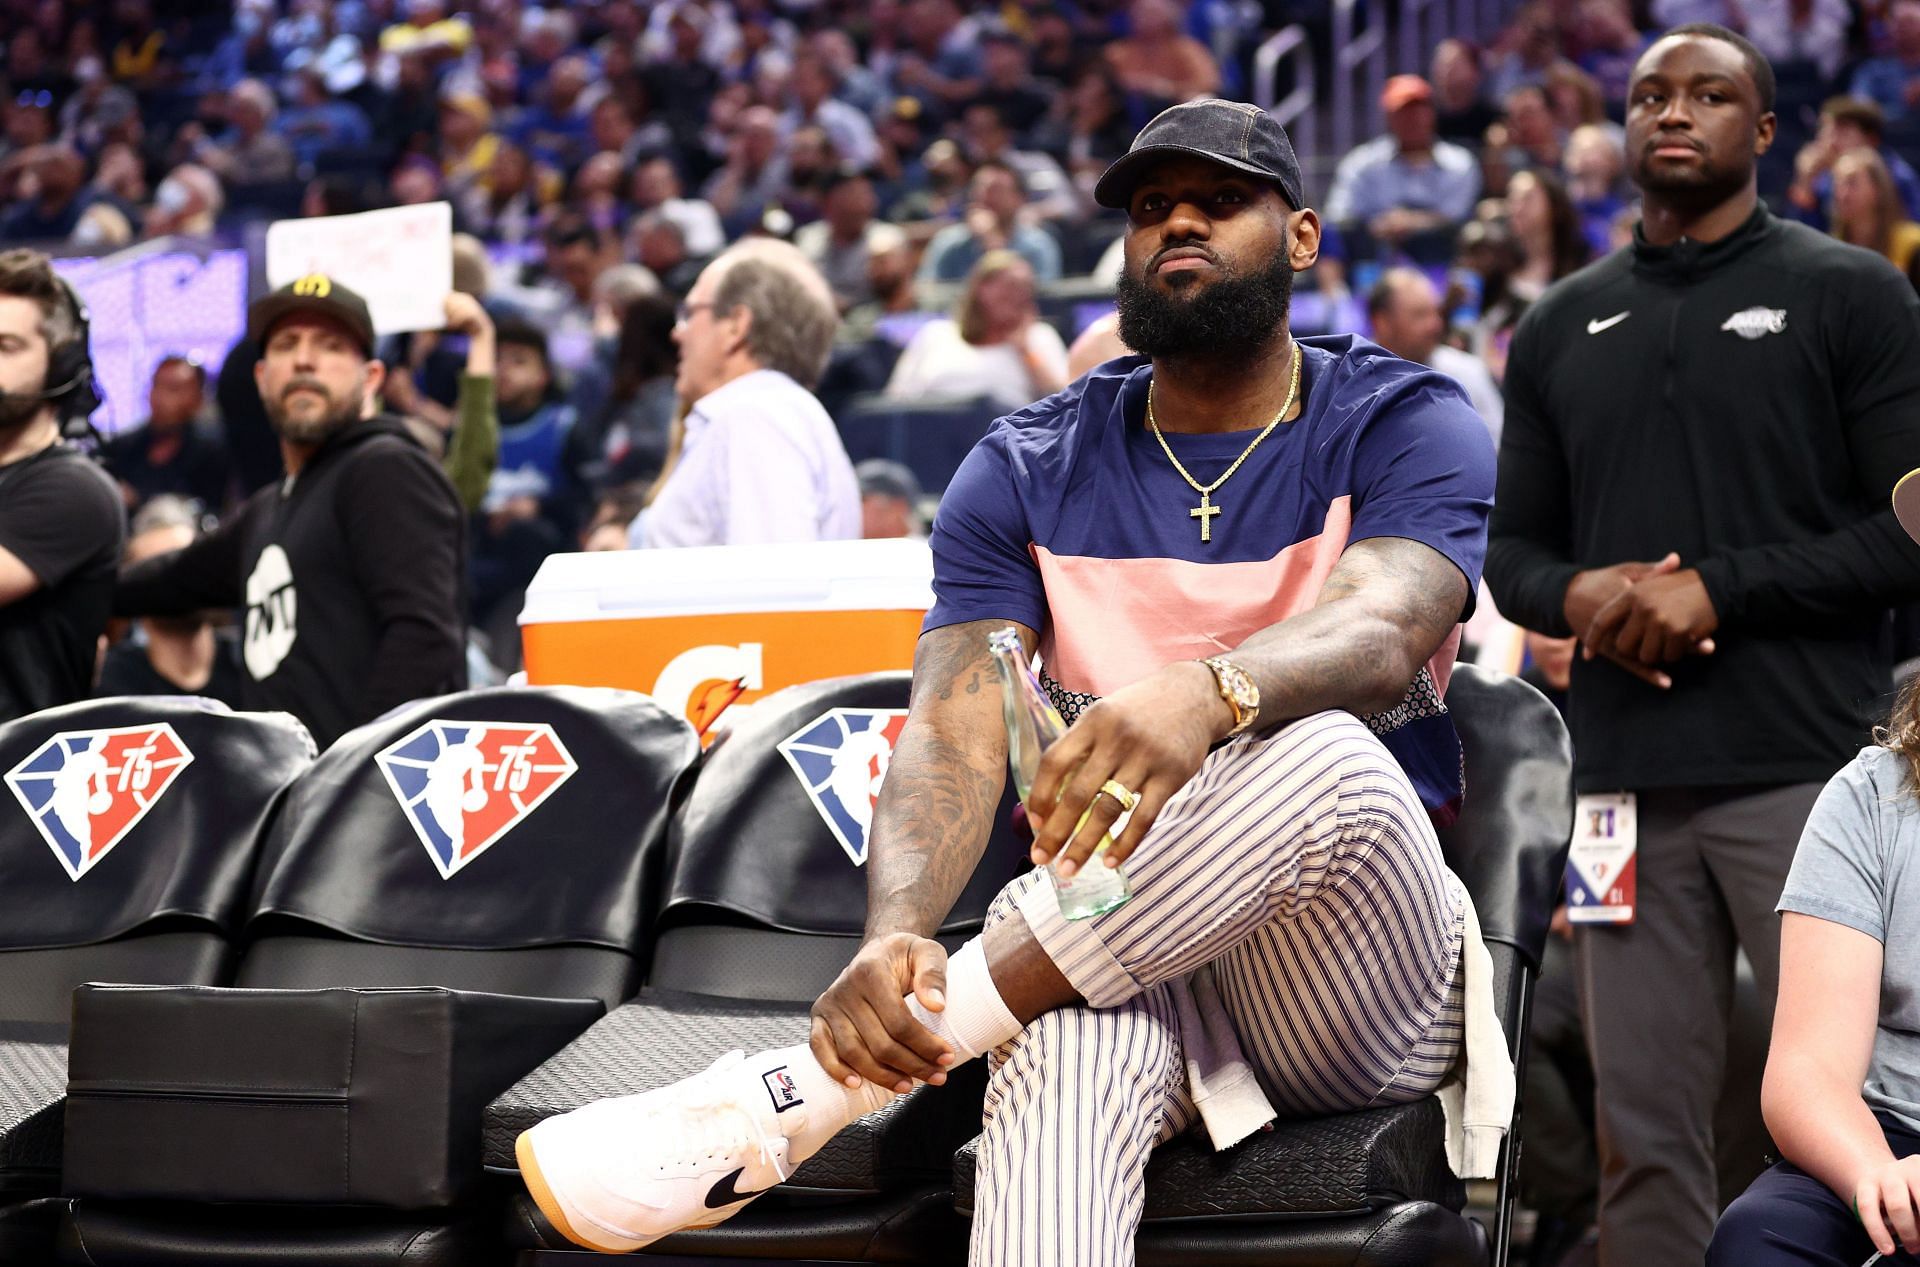 LeBron James of the LA Lakers on the bench at Chase Center.